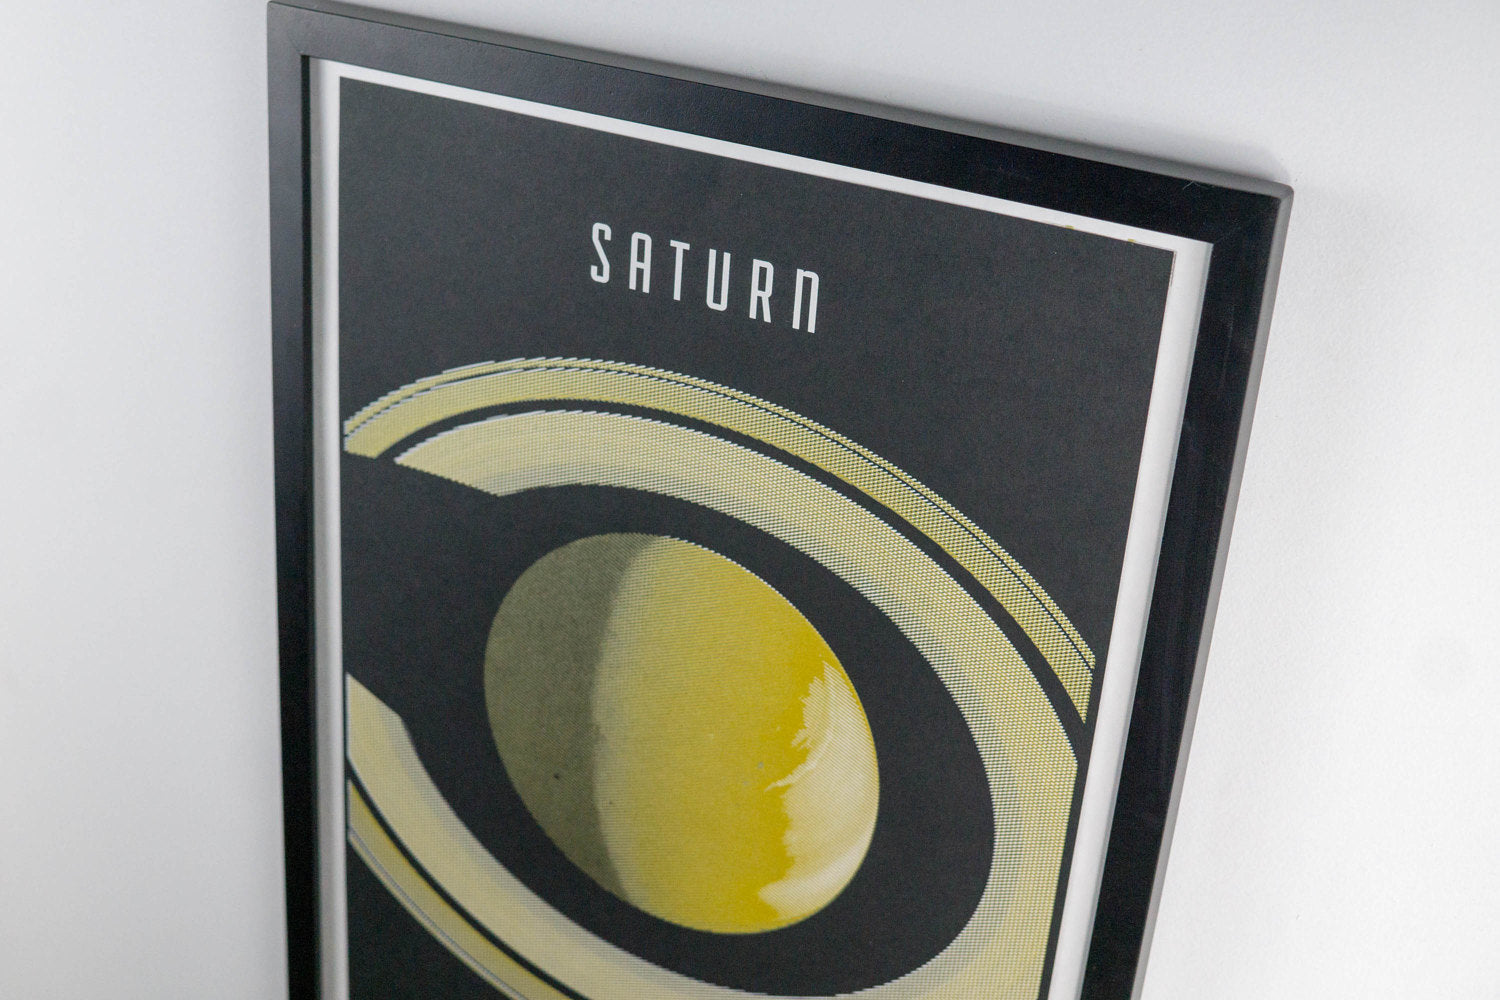 Planet Saturn Poster